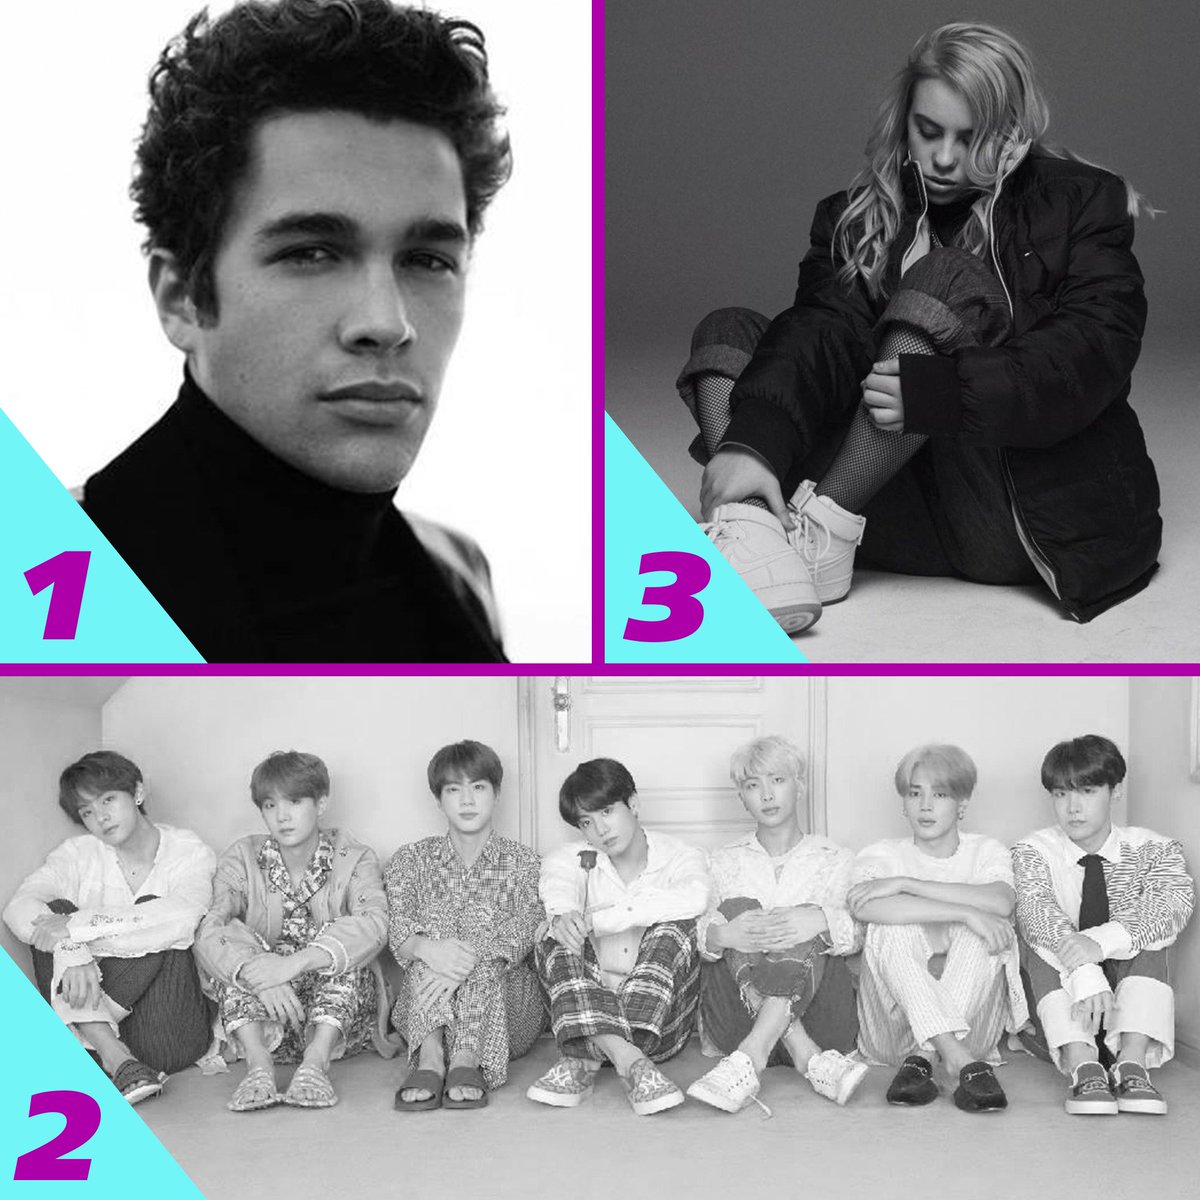 Here's Monday's #RDTop3! 1. @AustinMahone - #DancingWithNobody 2. @BTS_bighit - #Lights 3. @BillieEilish - #badguy (with @JustinBieber)